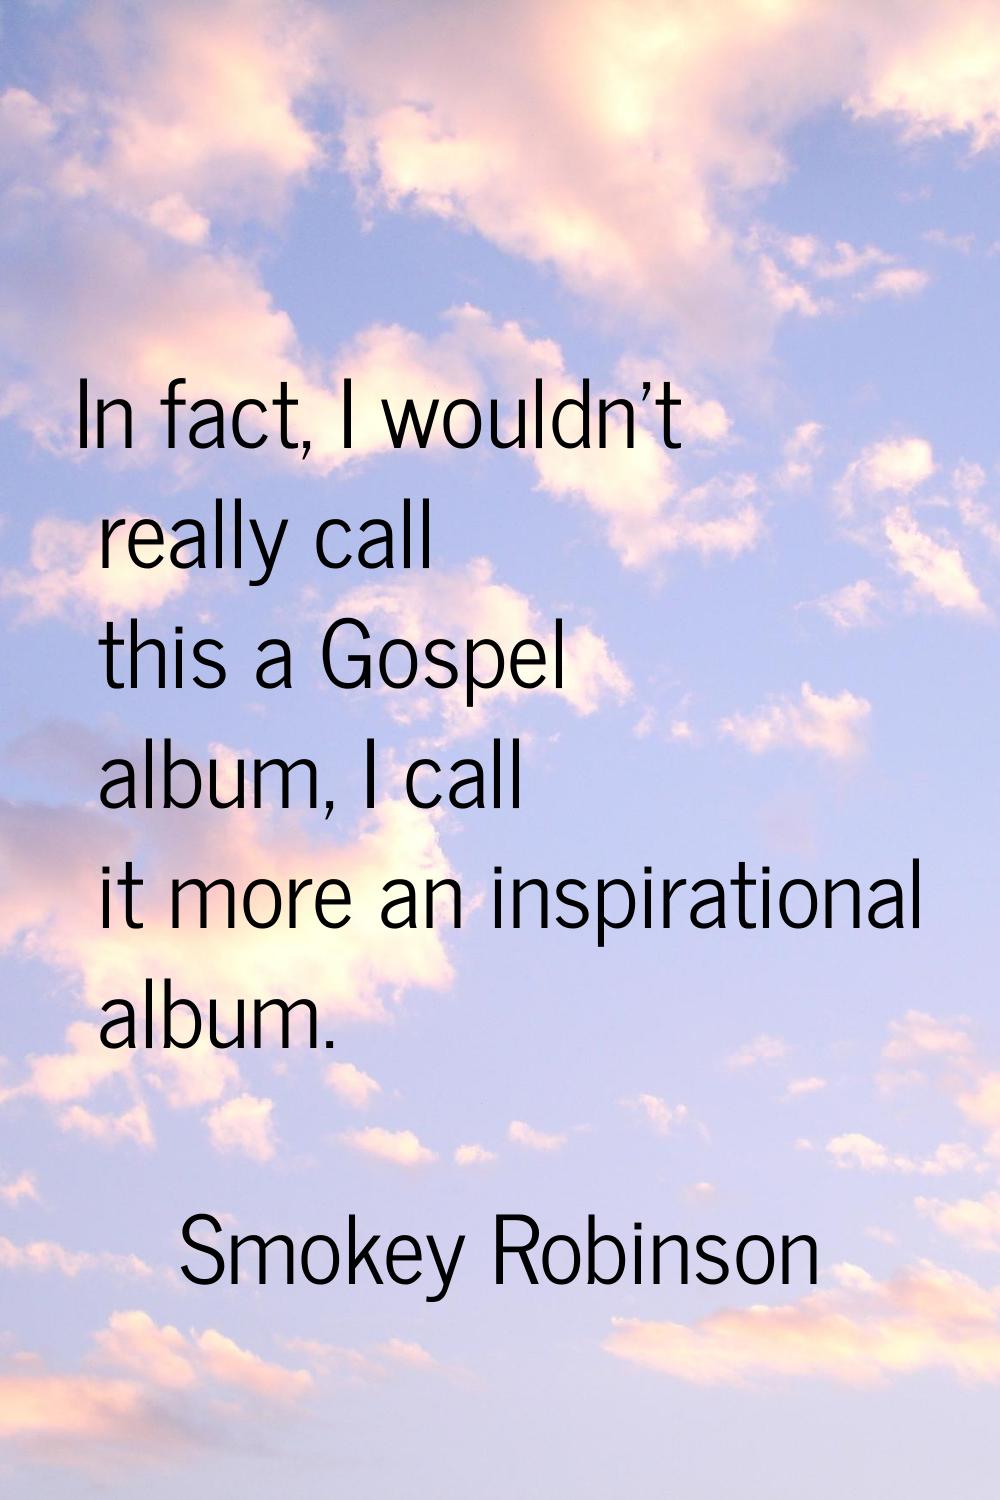 In fact, I wouldn't really call this a Gospel album, I call it more an inspirational album.